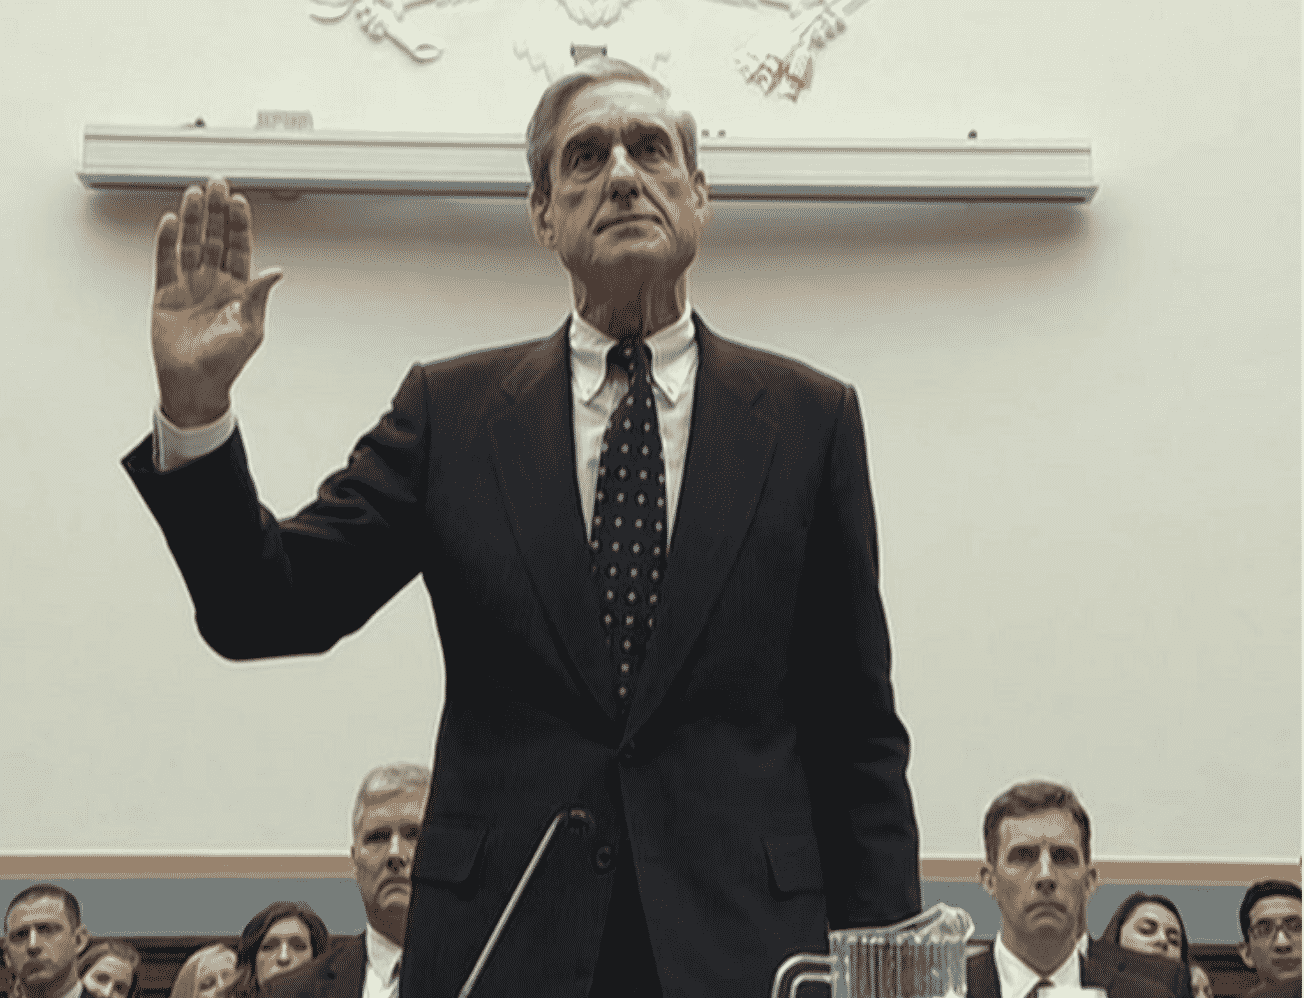 Mueller’s Deep State Ploy Against Russia. The FAKE “Russia investigation” of the Deep State with Trump